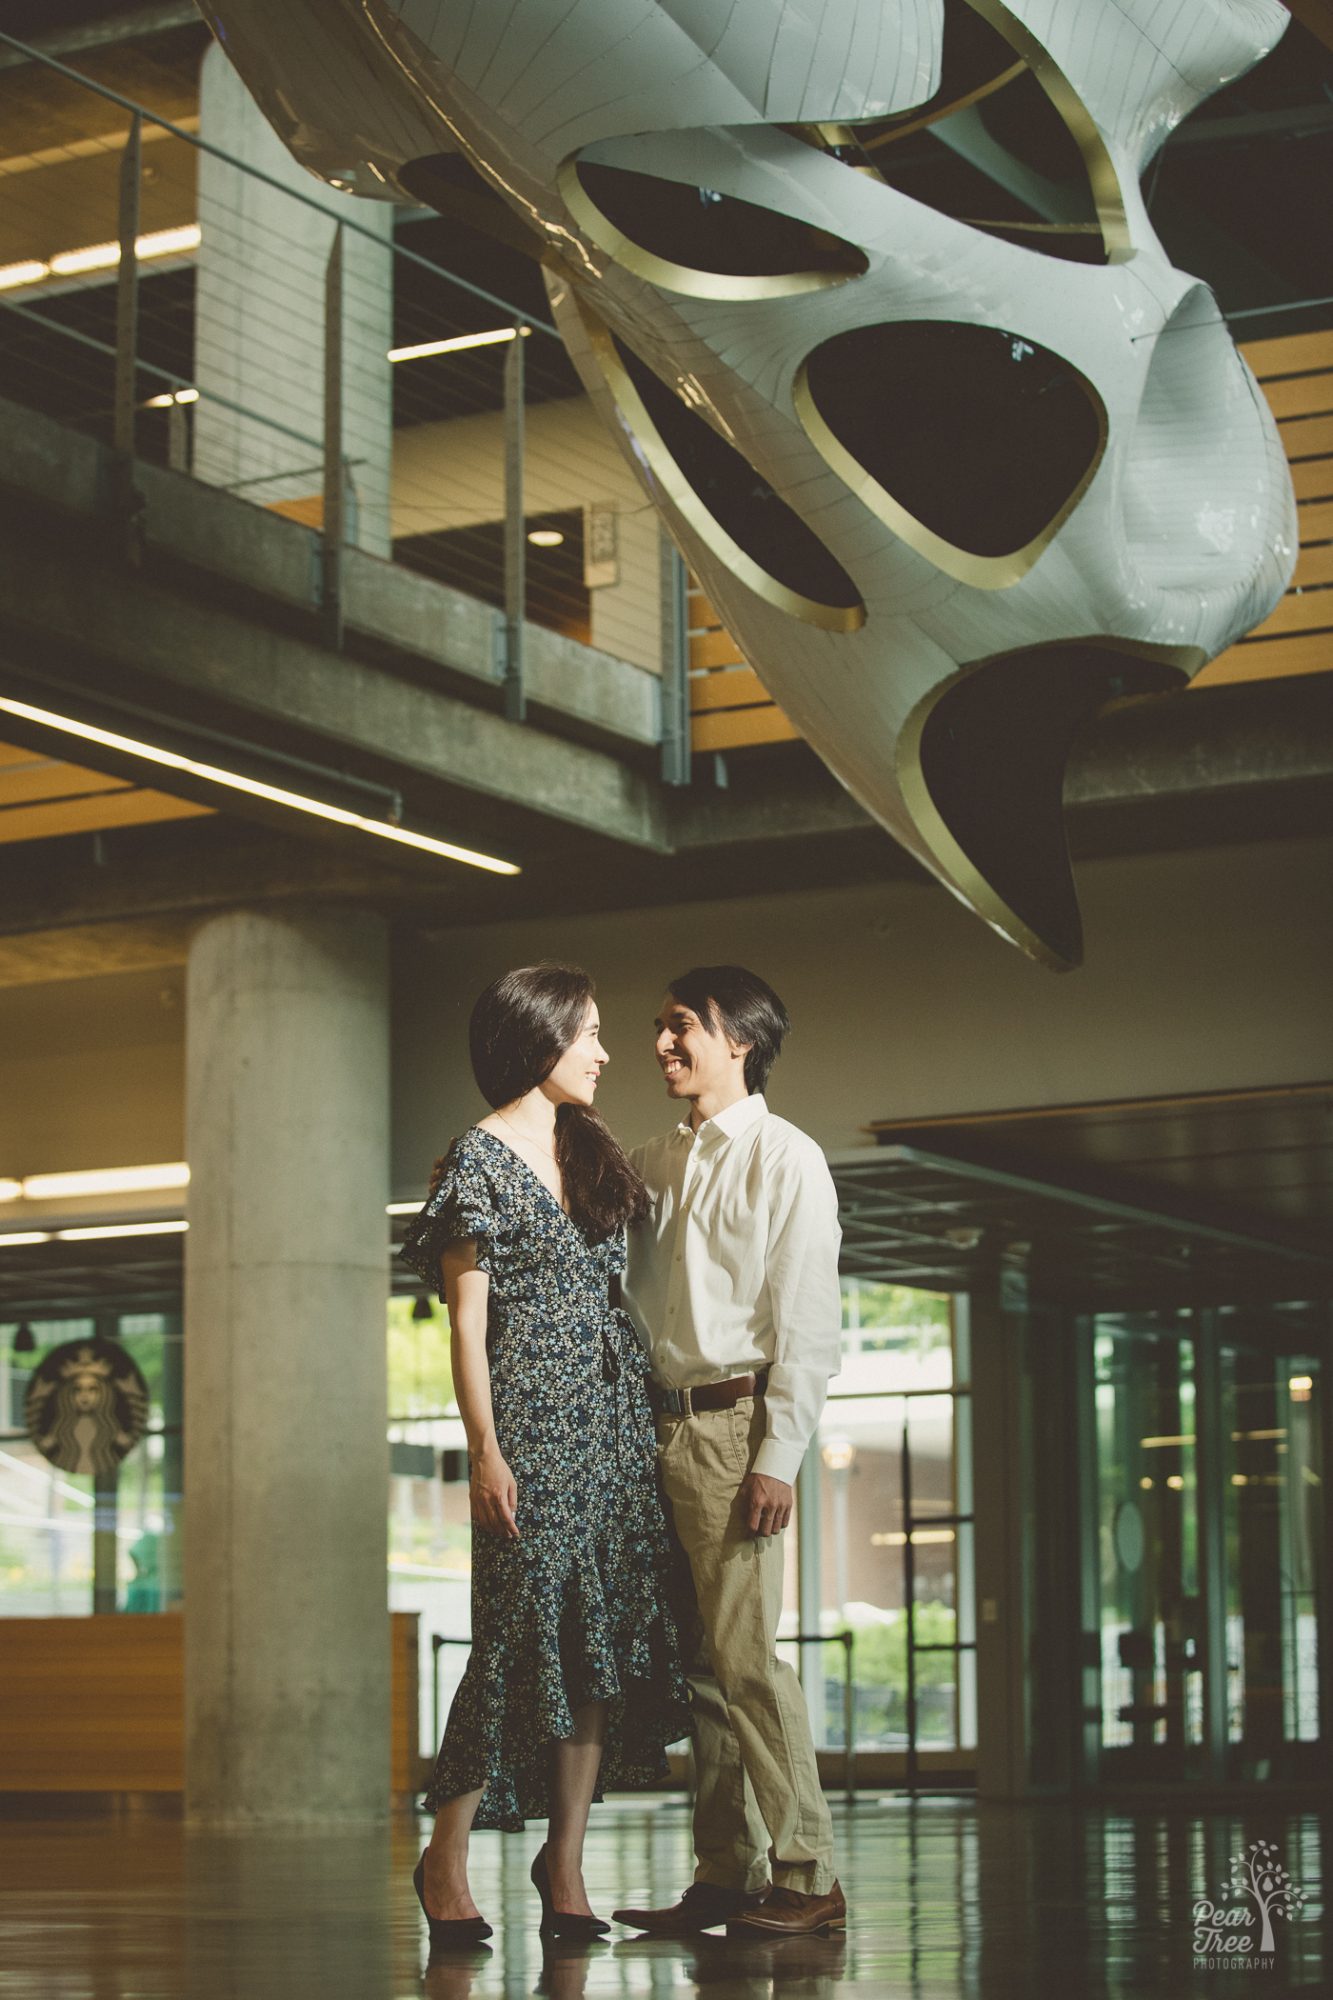 Two architects standing under the sculpture they helped design and build at Georgia Tech during their engagement photography session.